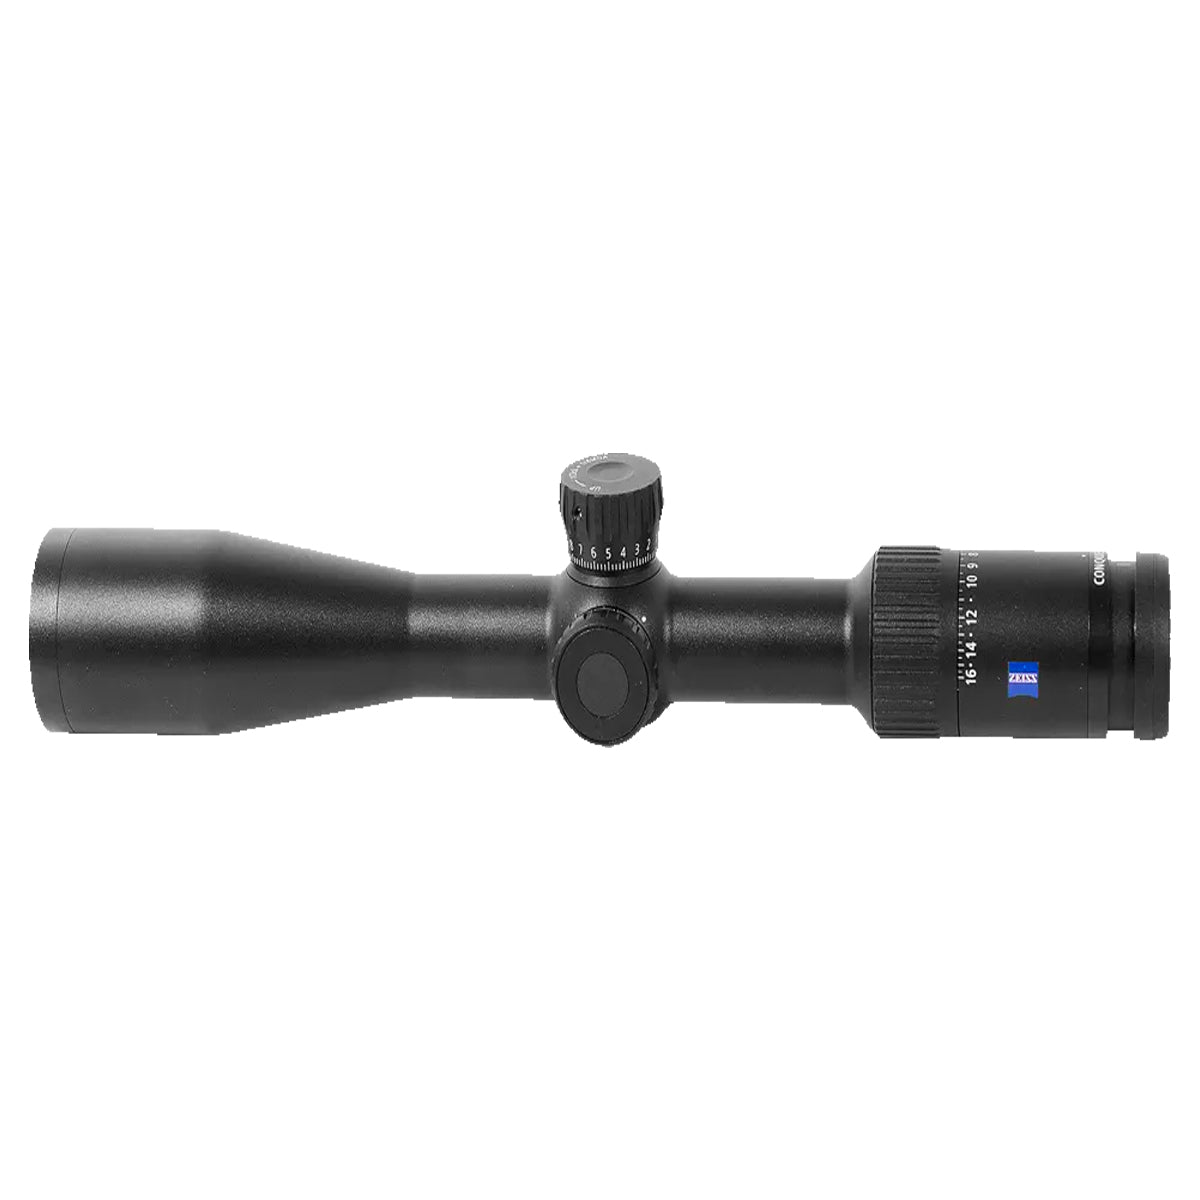 Zeiss Conquest V4 Rifle Scope 4-16x44 Plex Illuminated #60 Reticle in  by GOHUNT | Zeiss - GOHUNT Shop